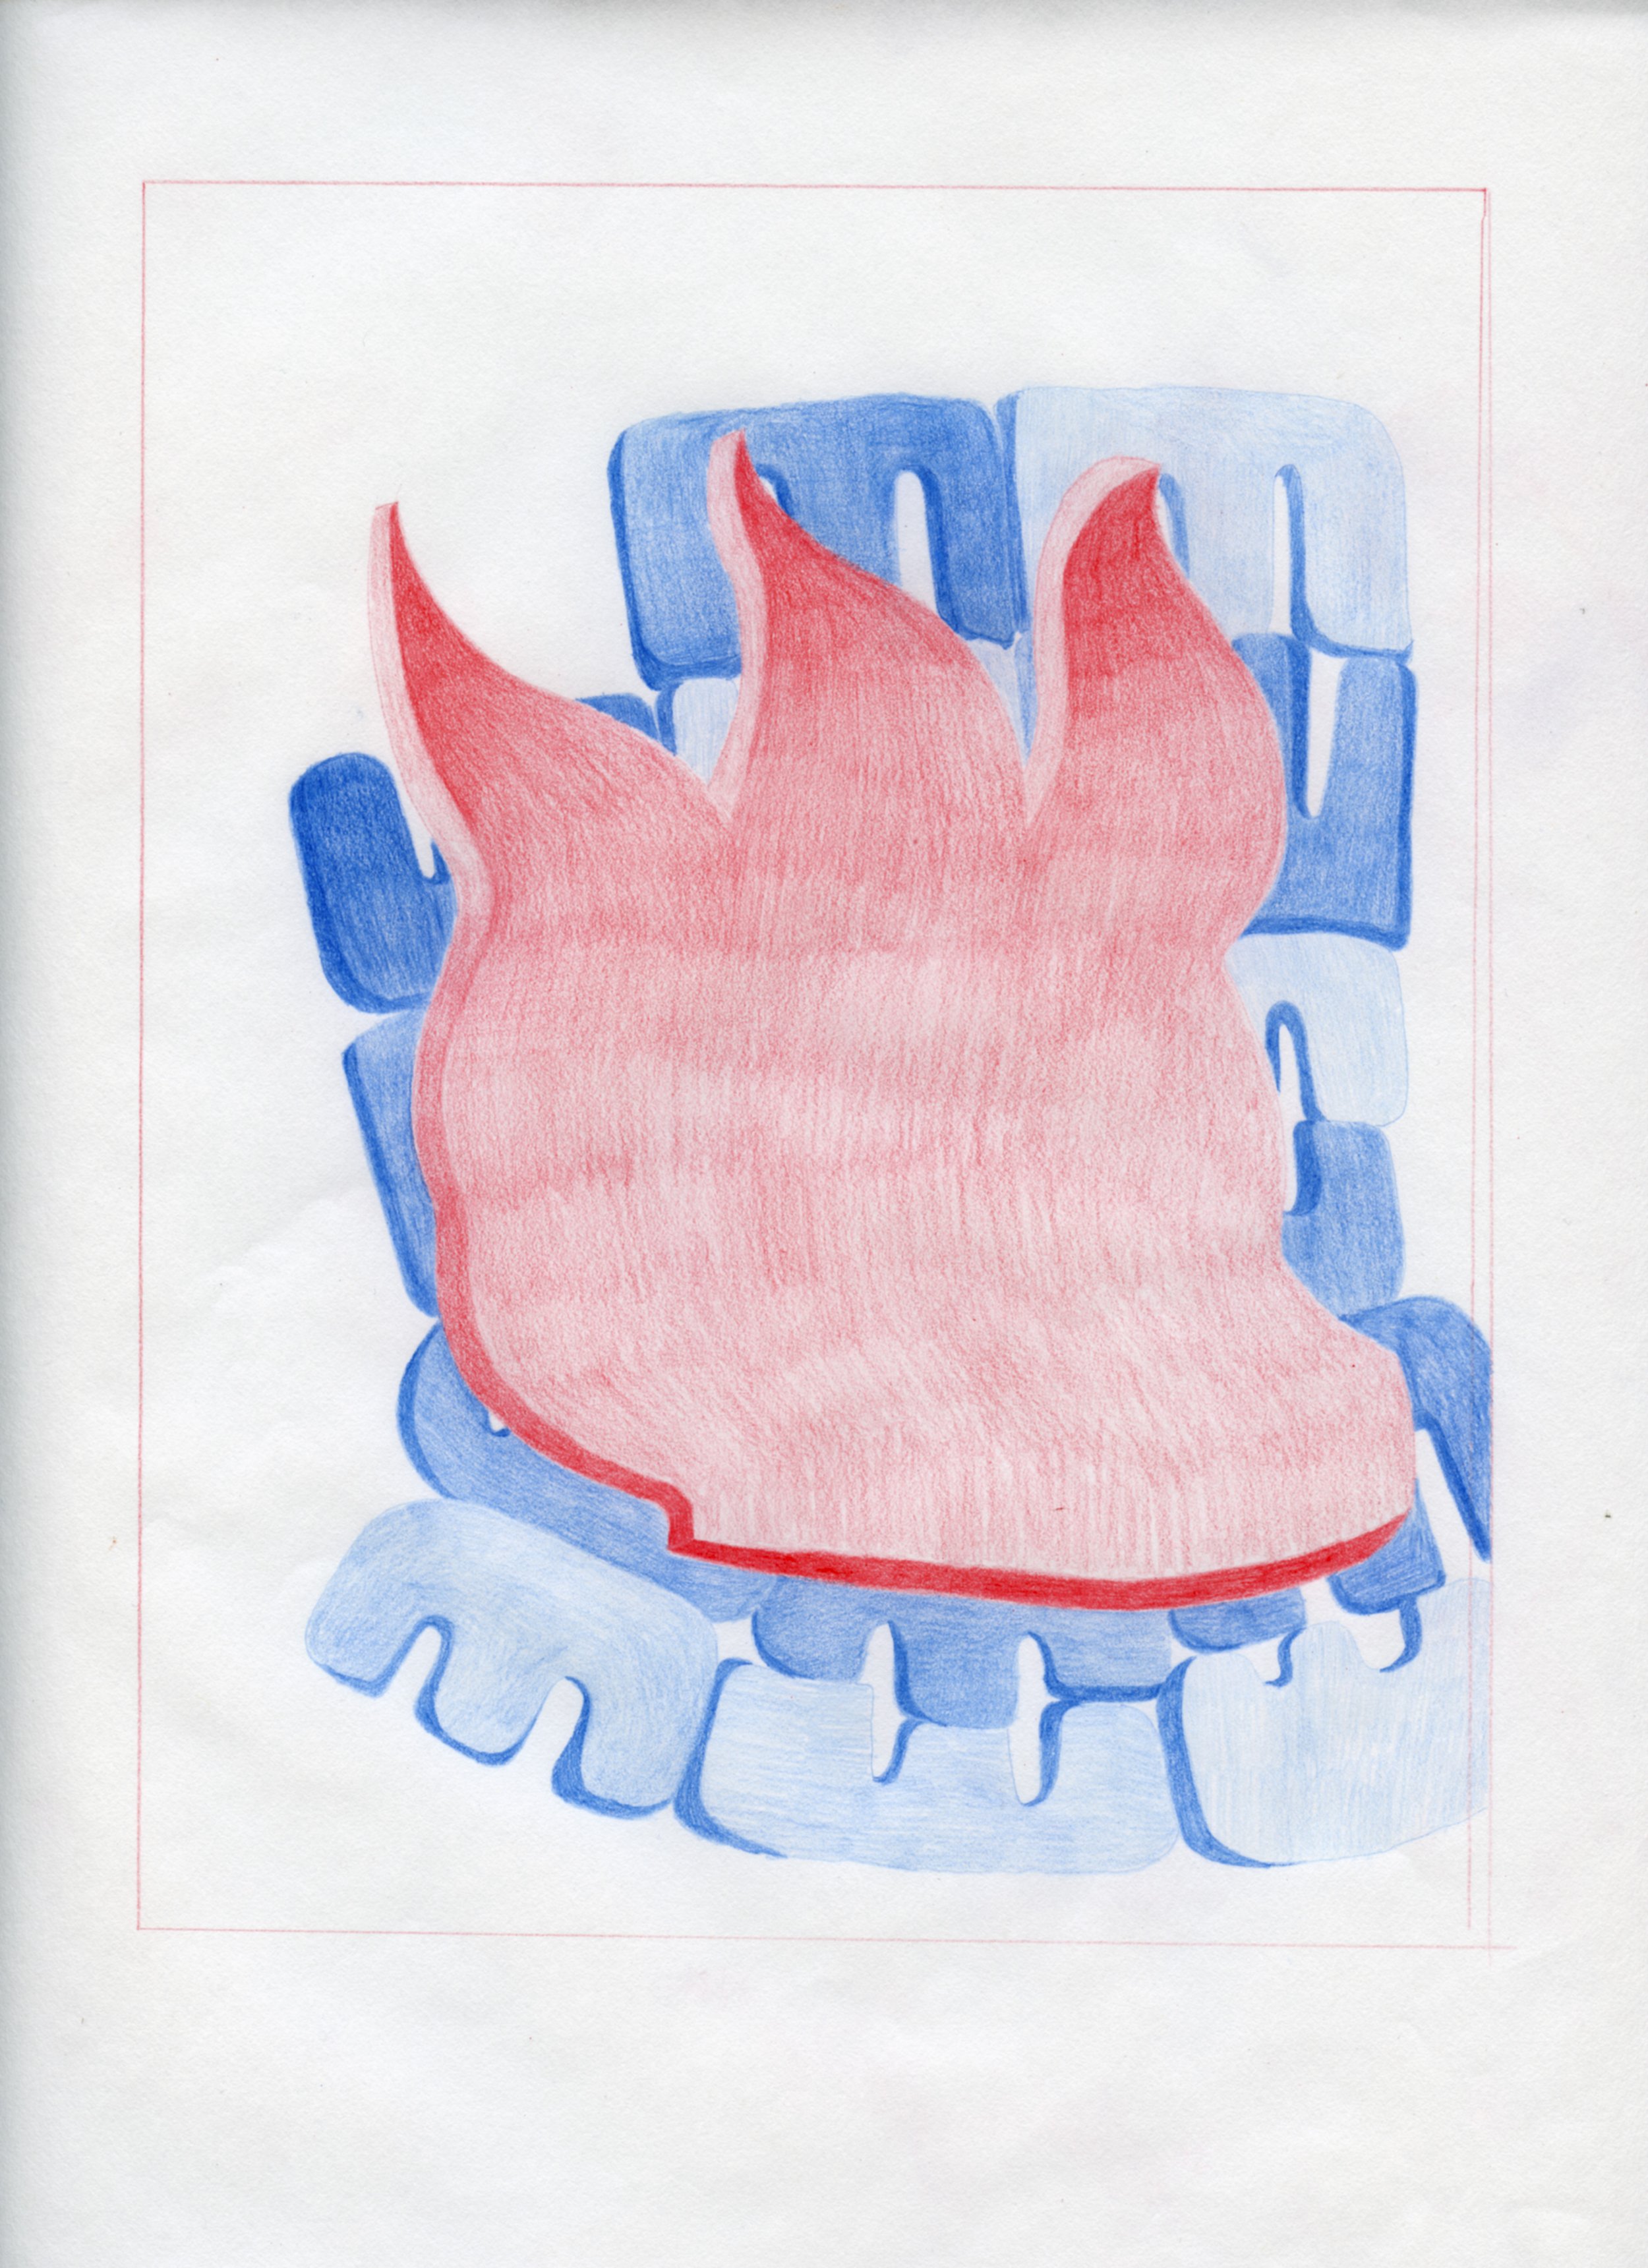  Workplace Drawing #8, 2021, Red and Blue Graphite on Bond Paper, 9”x 12”. 